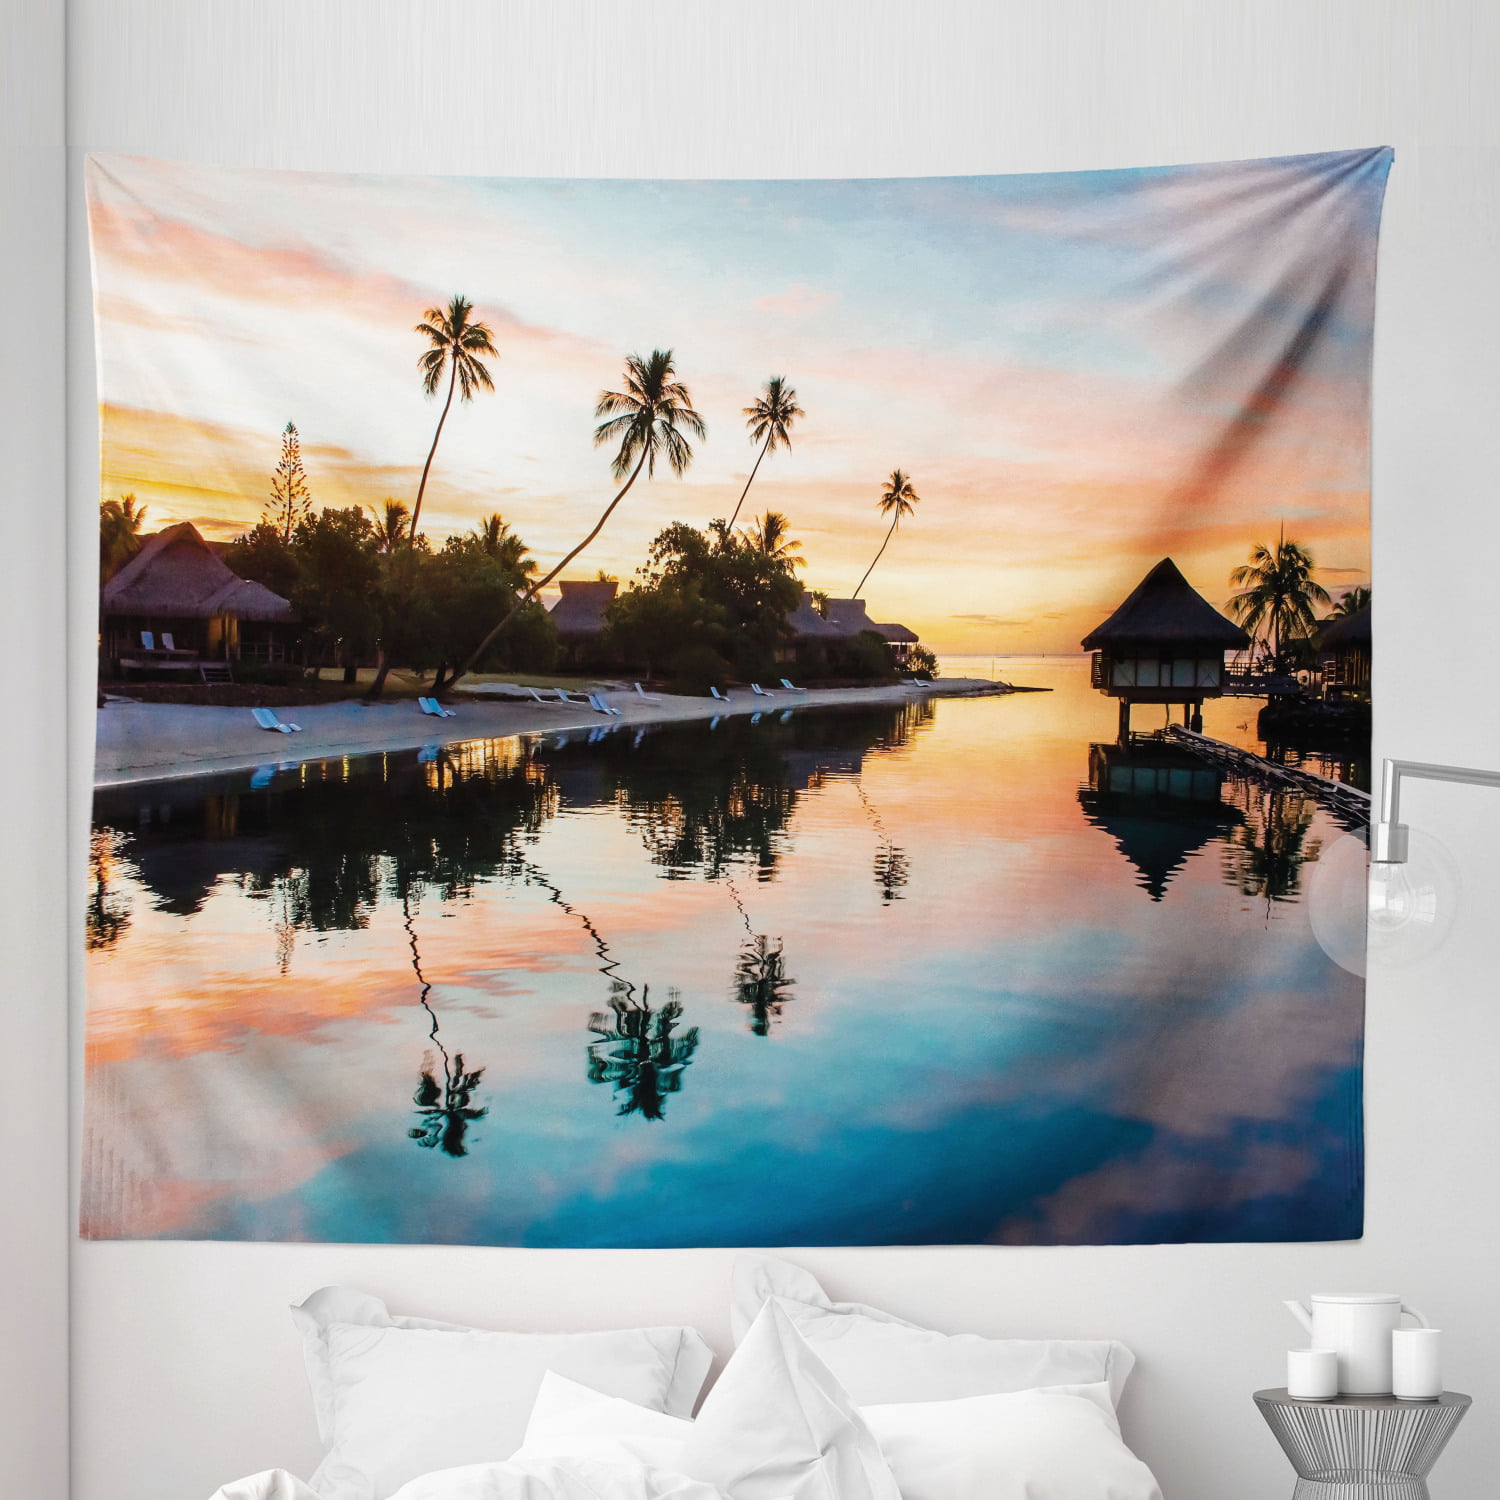 Sunset on Cooks Bay Moorea French Polynesia Photo Art Print Poster 18x12 inch 